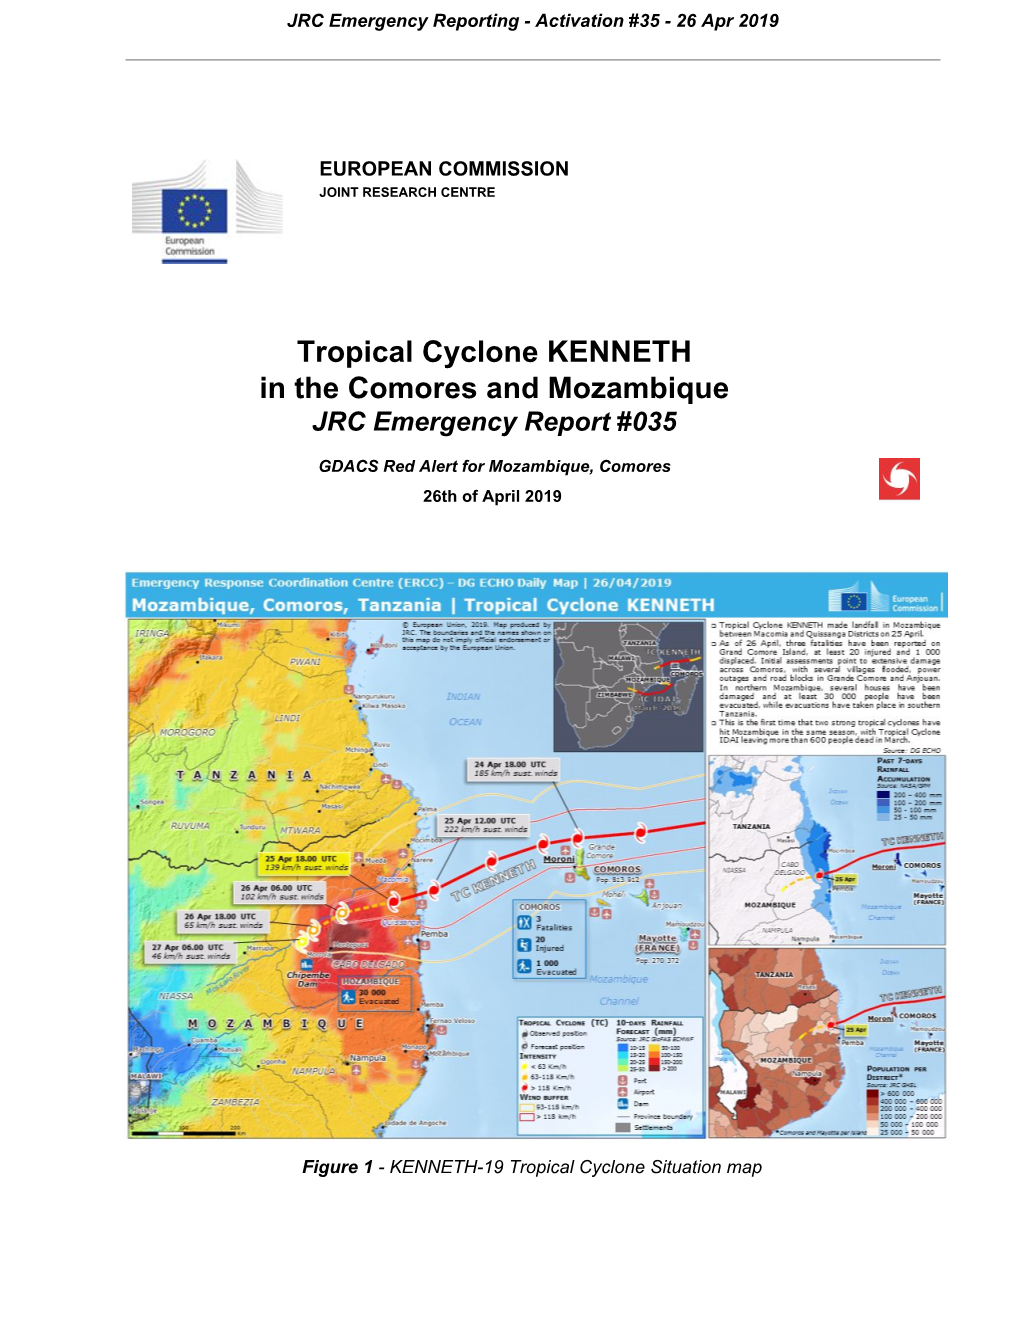 Tropical Cyclone KENNETH in the Comores and Mozambique JRC Emergency Report #035